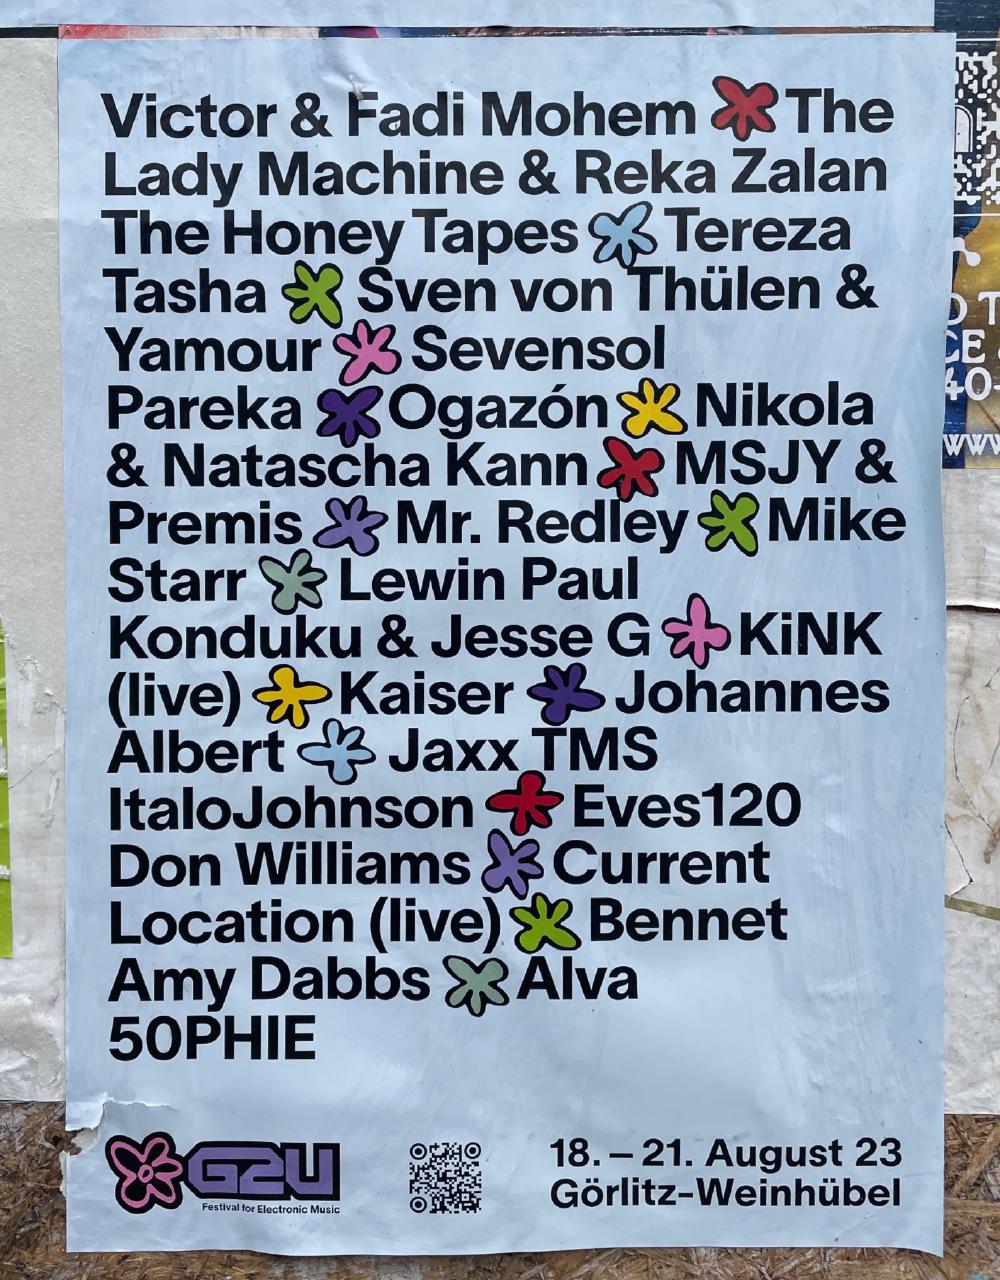 A long list of acts playing at GZU Festival of Electronic Music